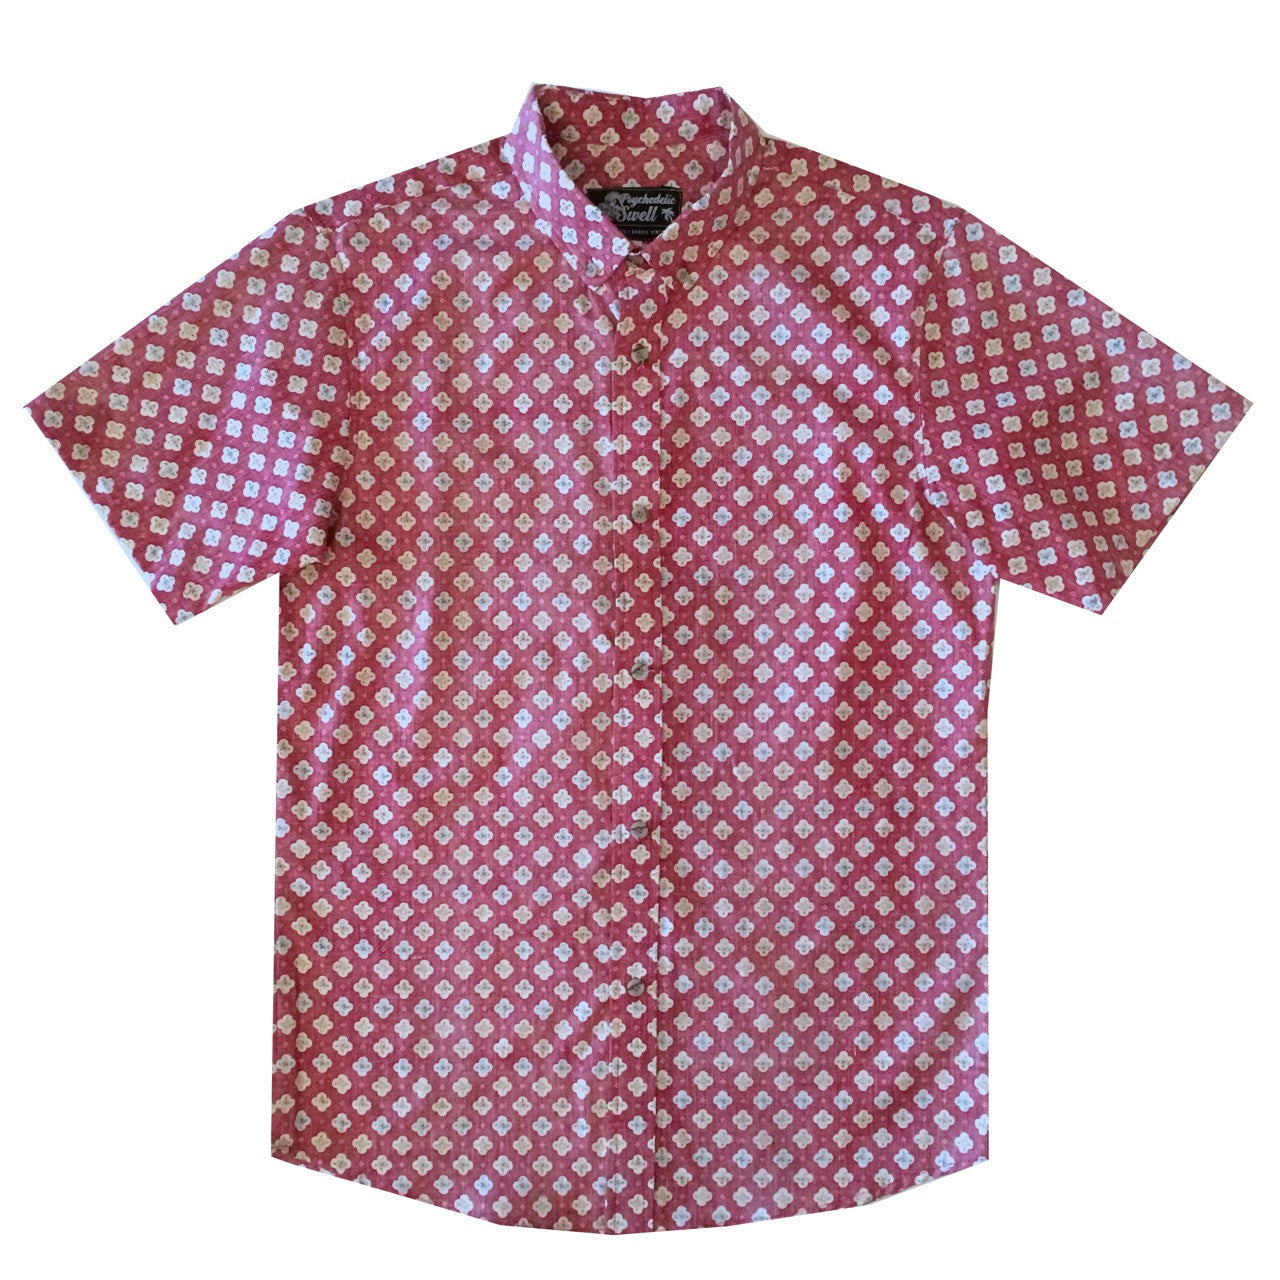 PS MENS BUTTON UP - LARGE